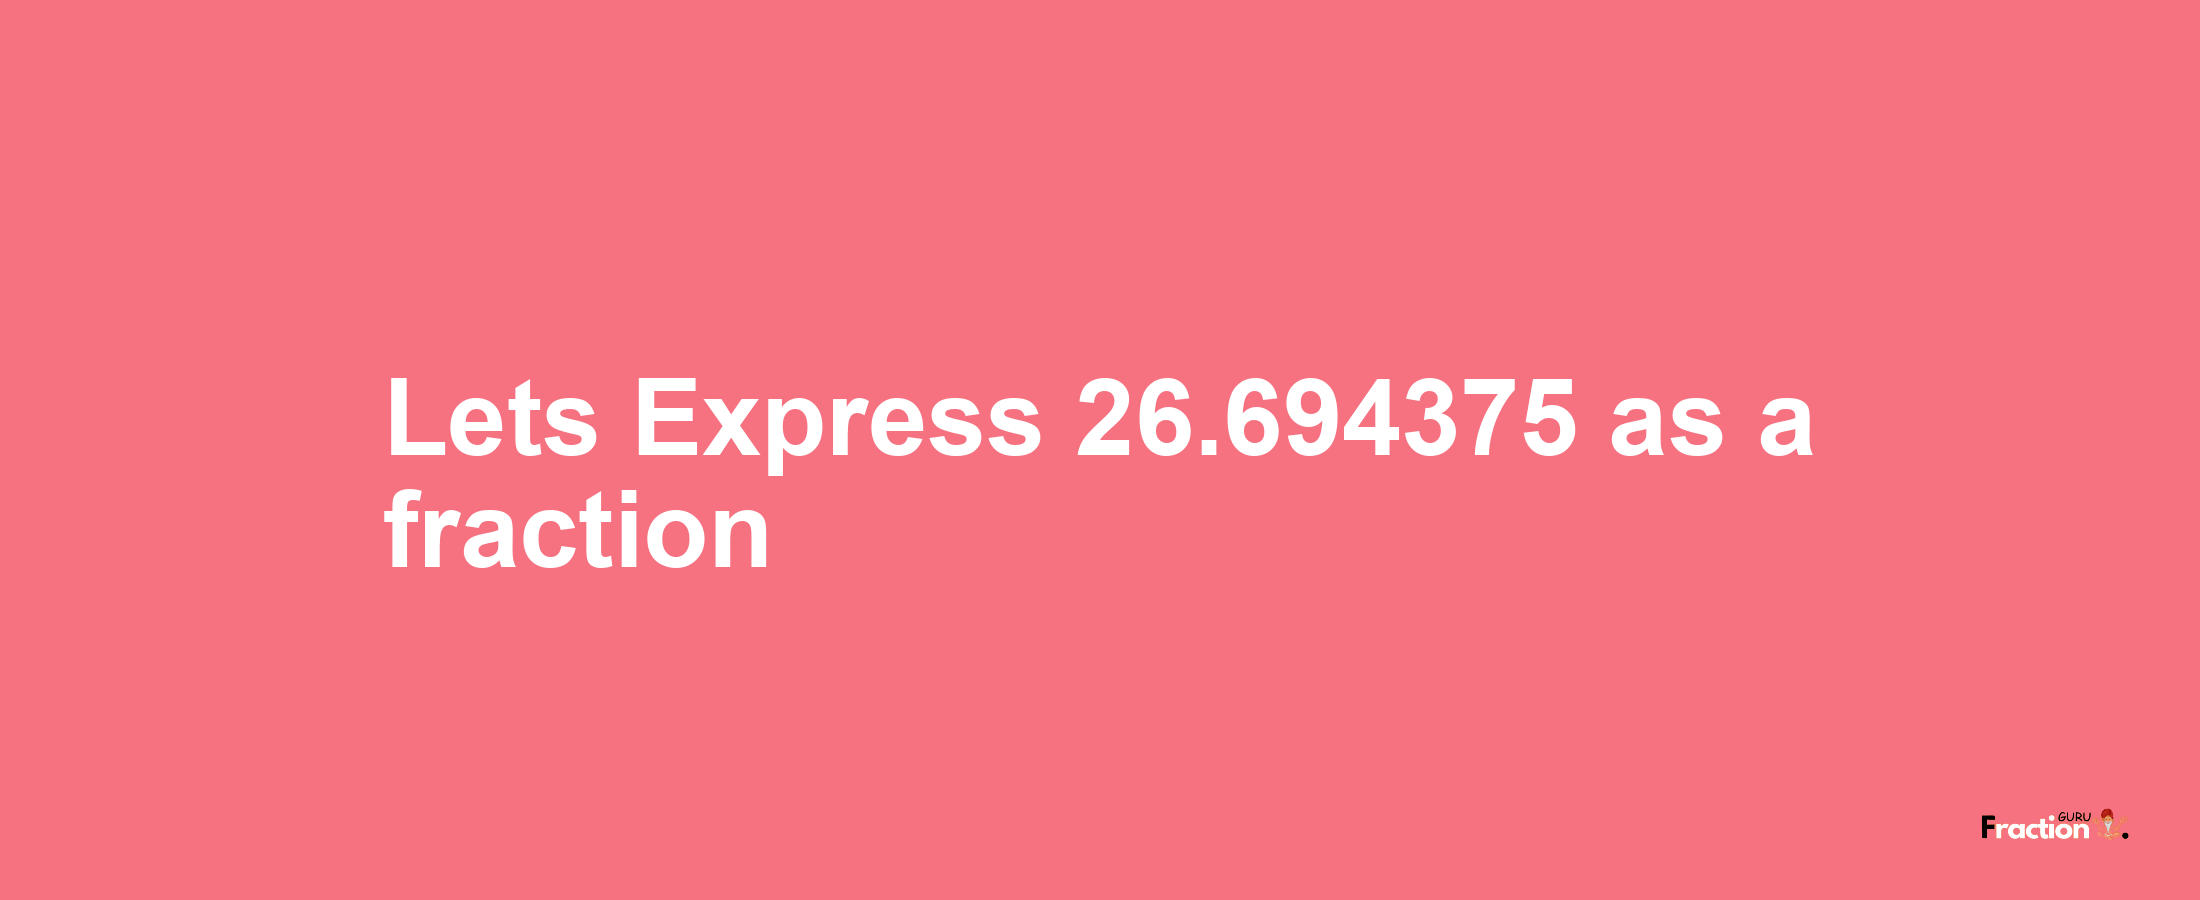 Lets Express 26.694375 as afraction